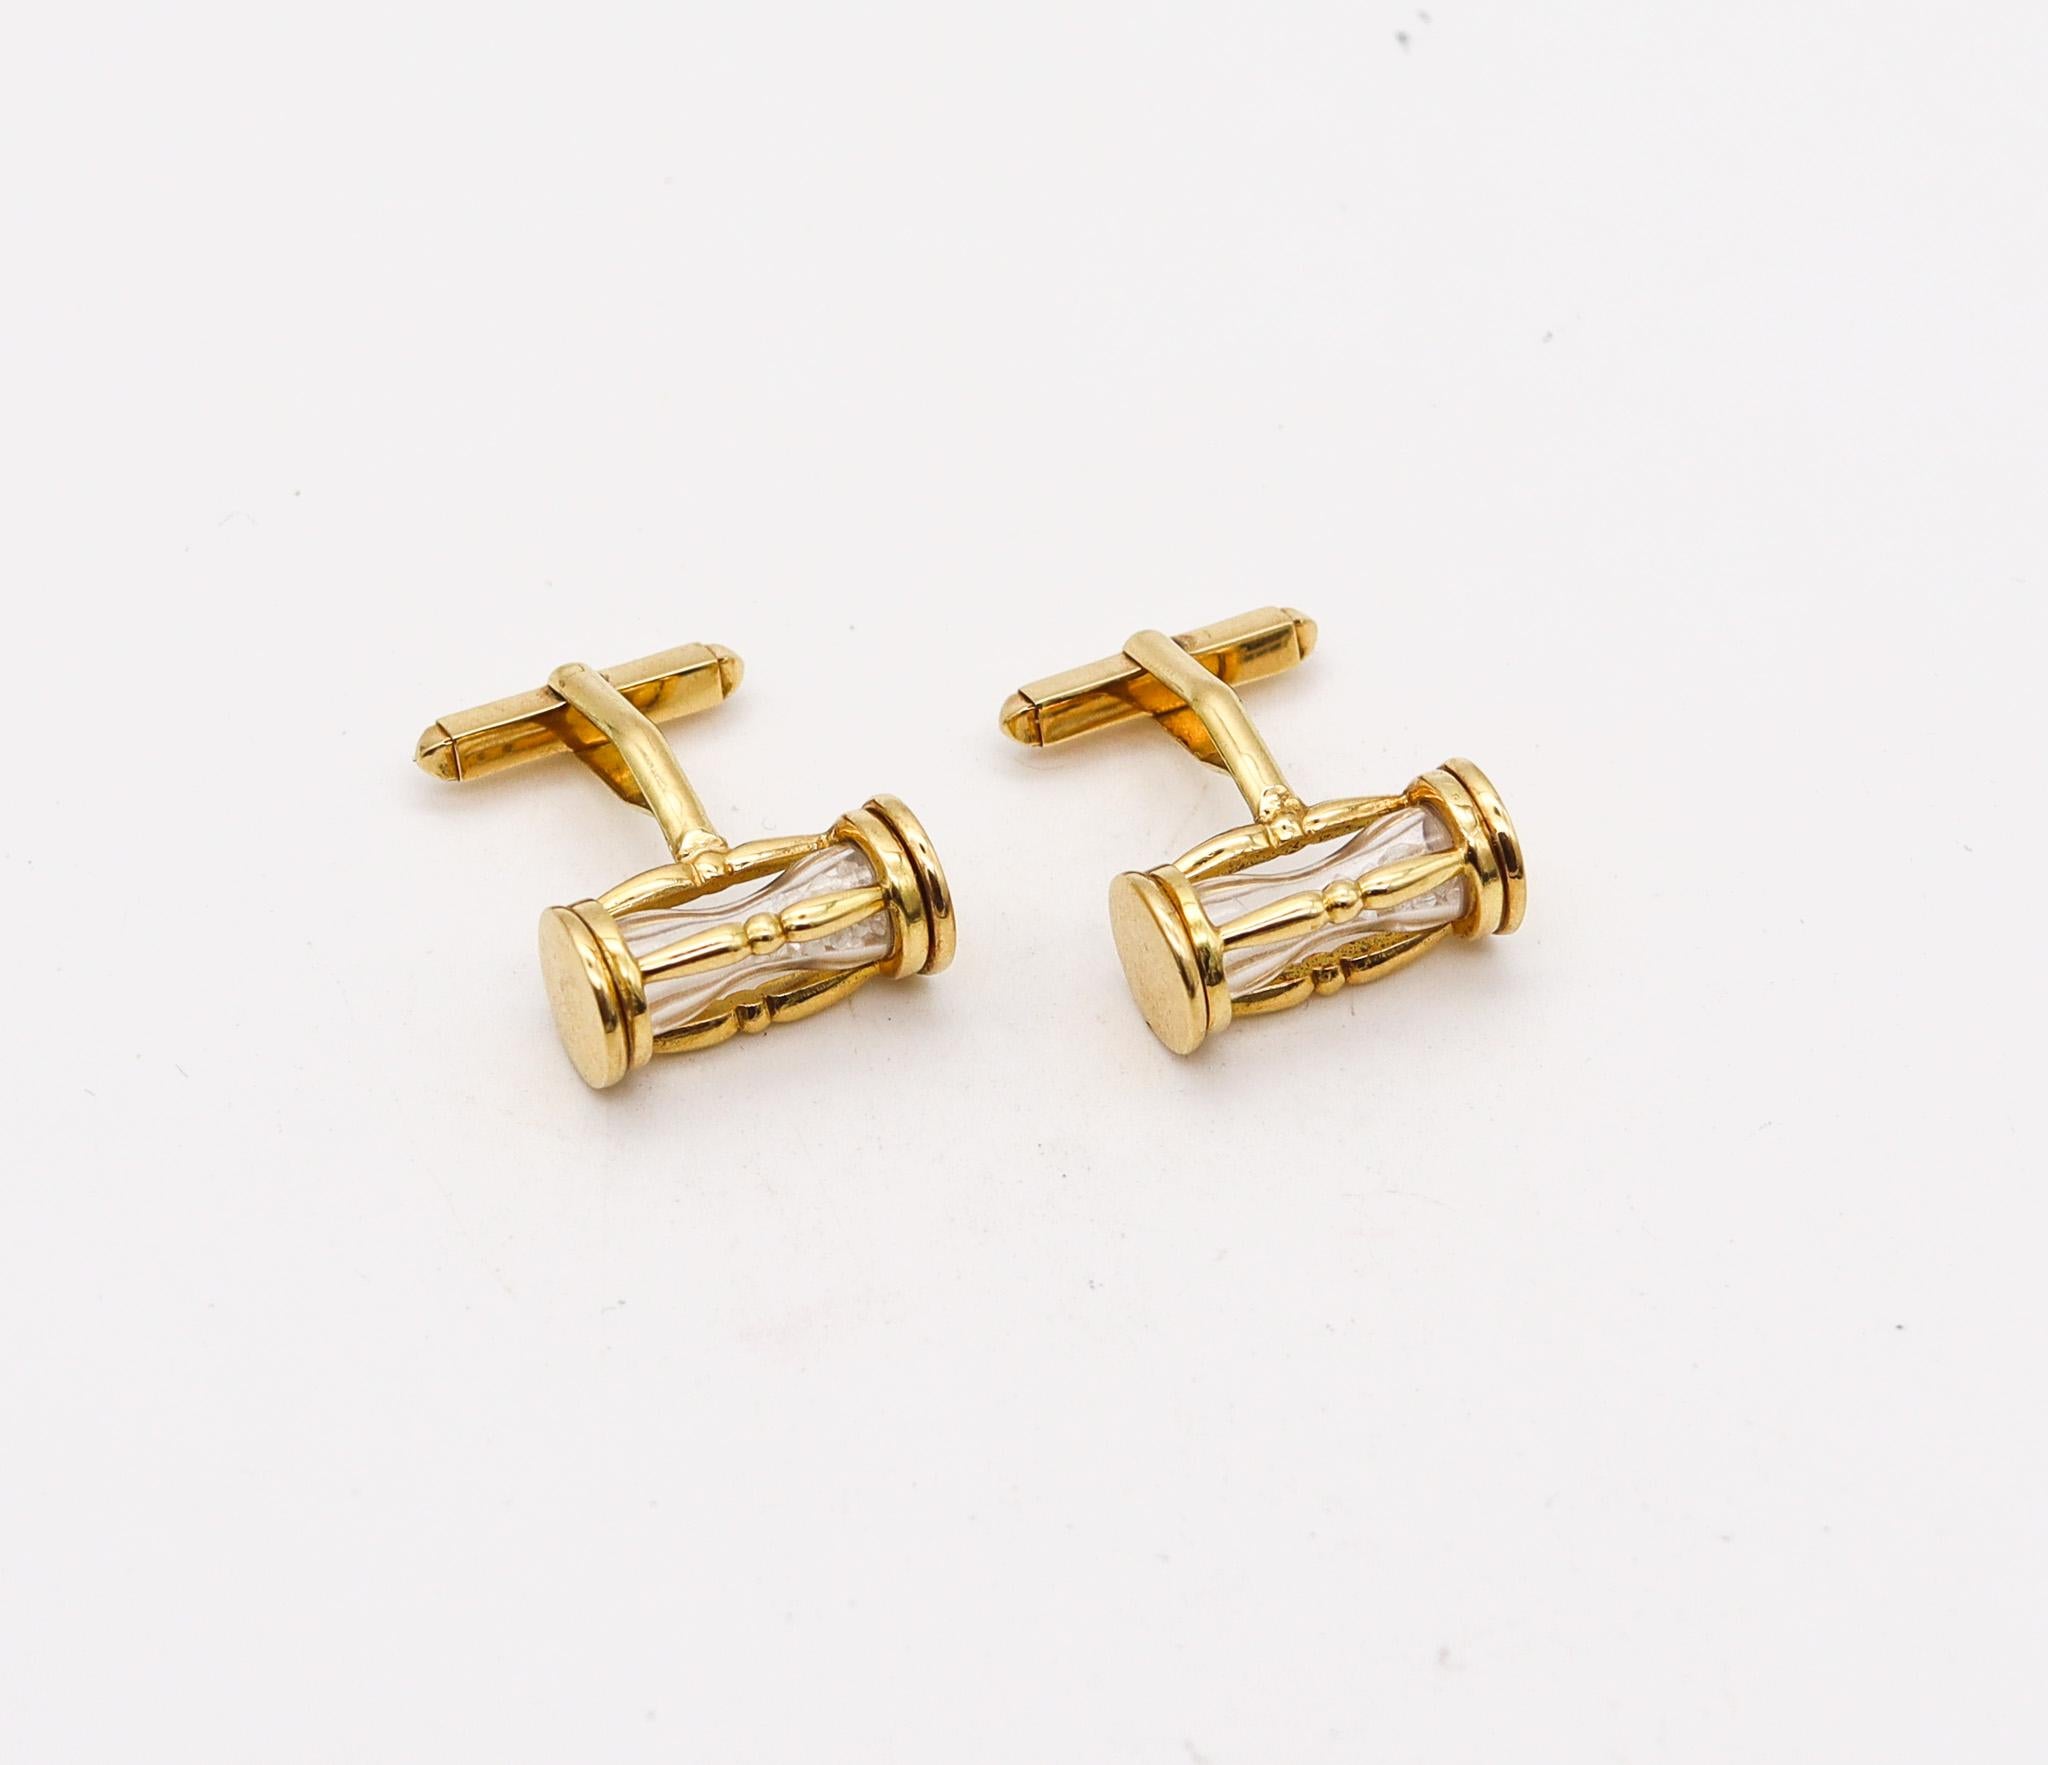 Sand clocks cufflinks designed in Germany.

Very unusual and beautiful pair of men's cufflinks, created in Germany back in the 1980. These playful pair has been crafted in the shape of sand clocks in solid yellow gold of 18 karats with high polished